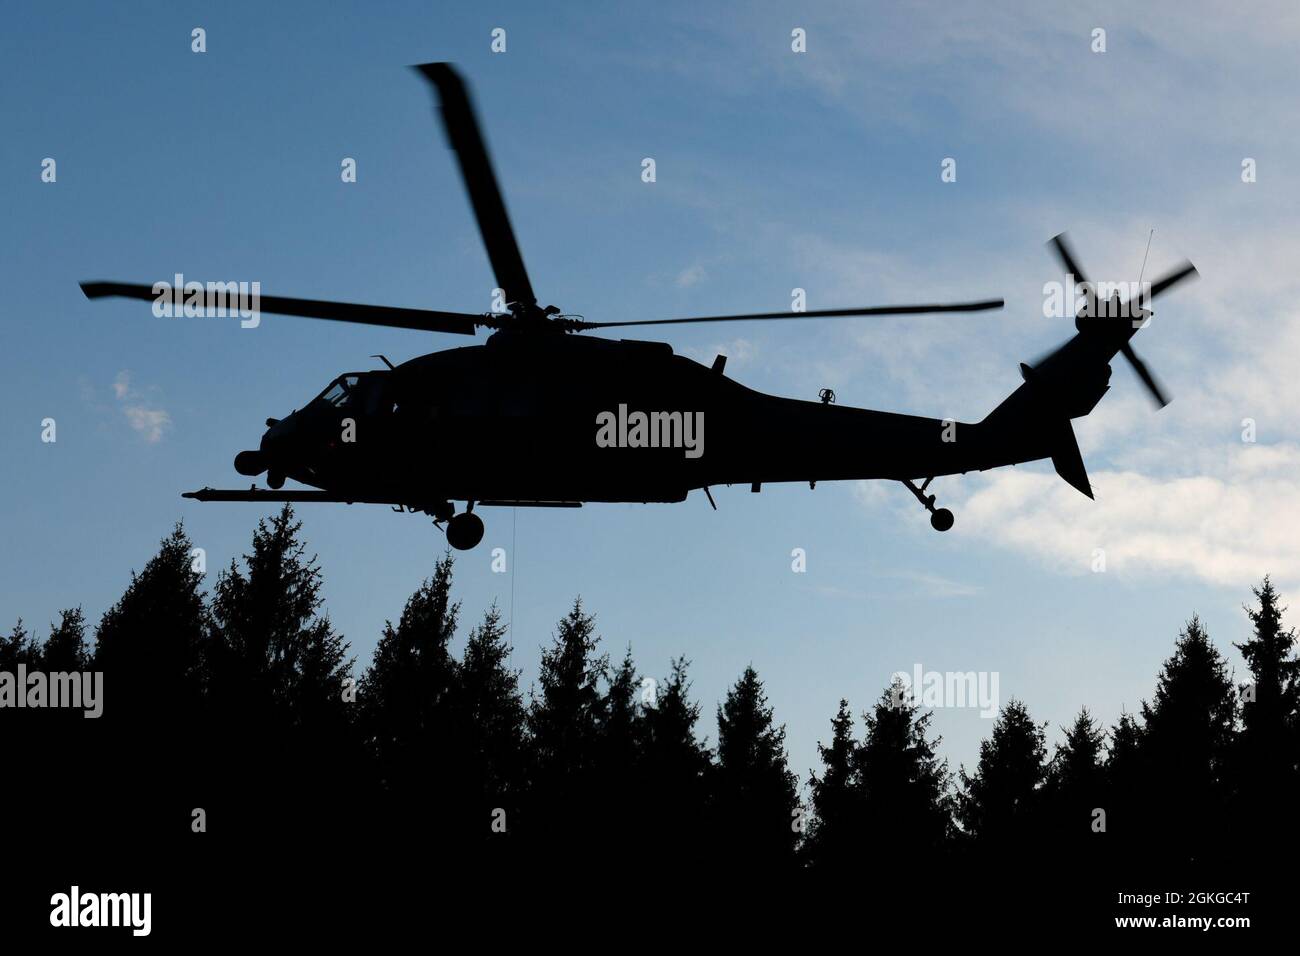 An HH-60 Pave Hawk prepares to rescue personnel at Cansiglio, Italy, April 15, 2021. The HH-60 rescued four ‘downed pilots’ in enemy territory during a combat survival training scenario. Stock Photo